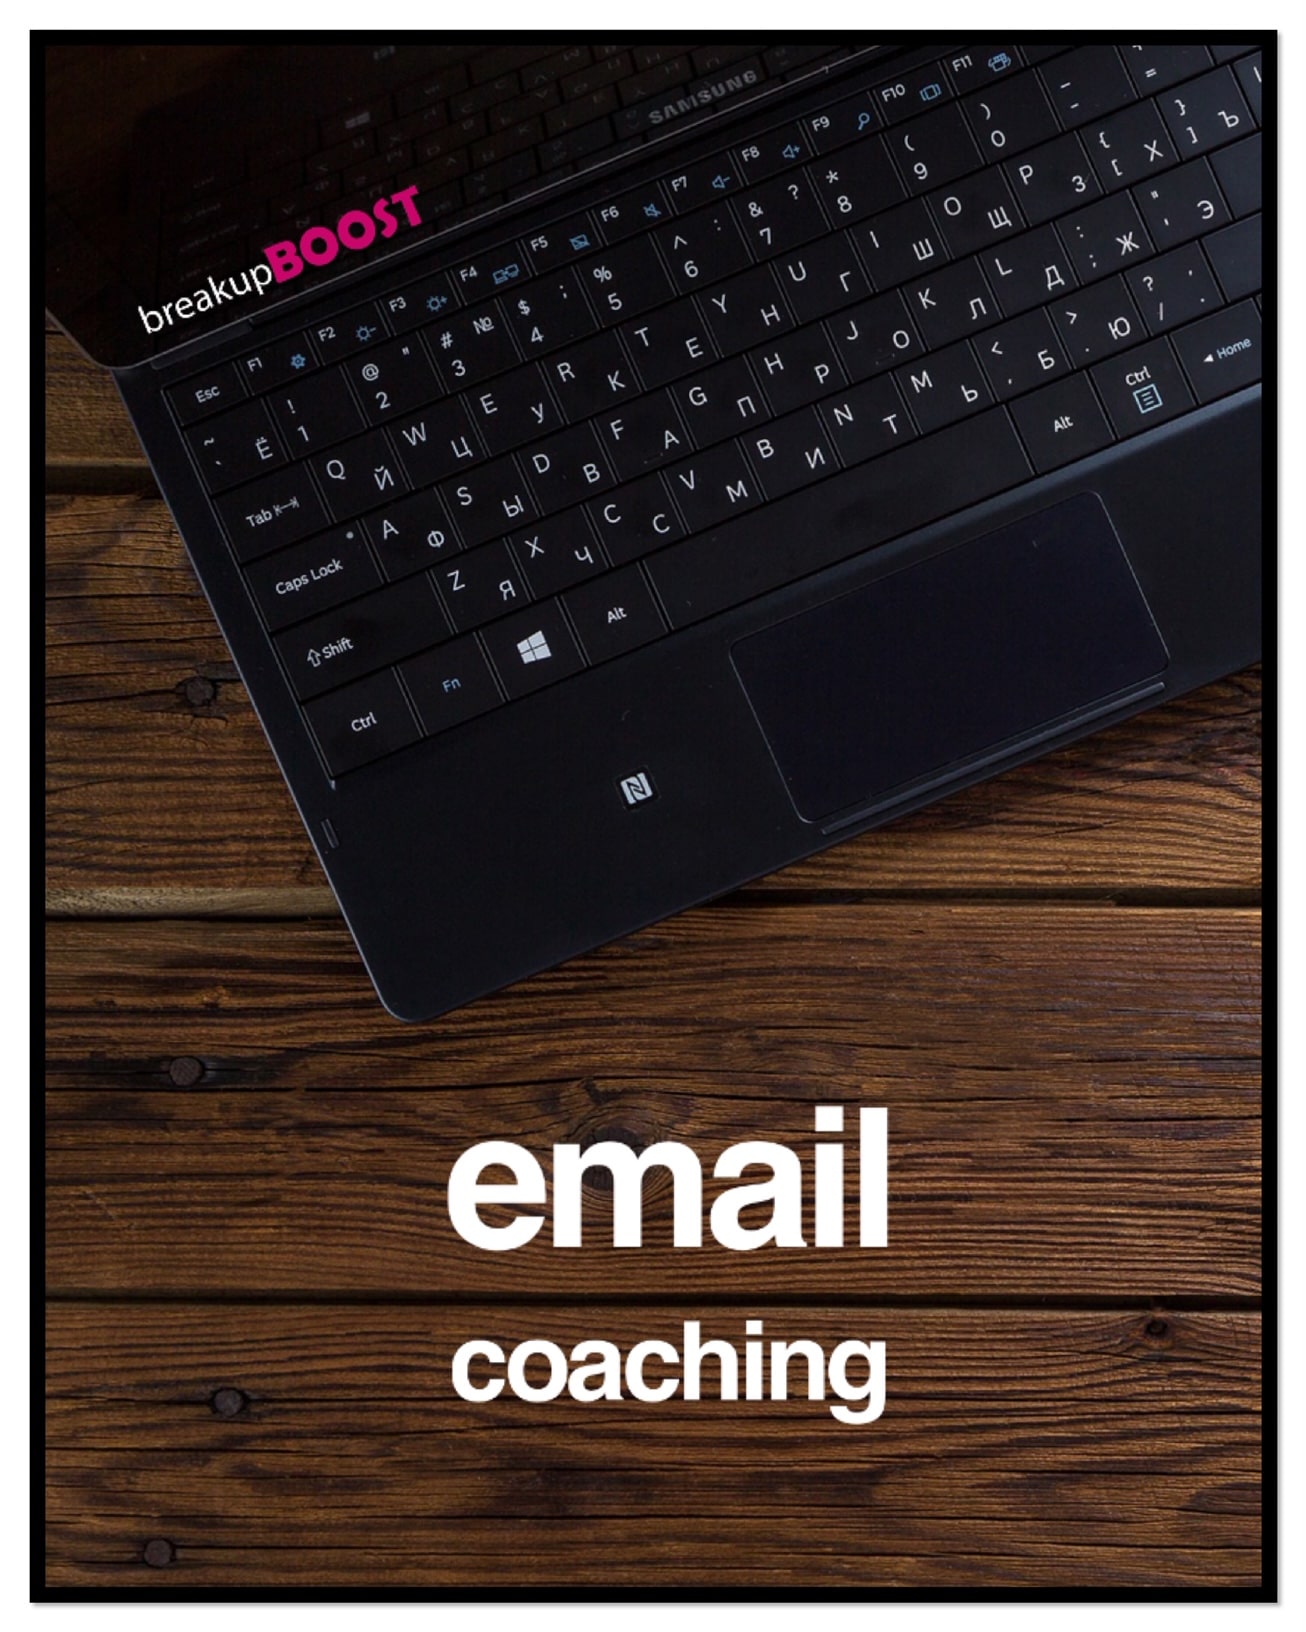 email coaching with breakup boost